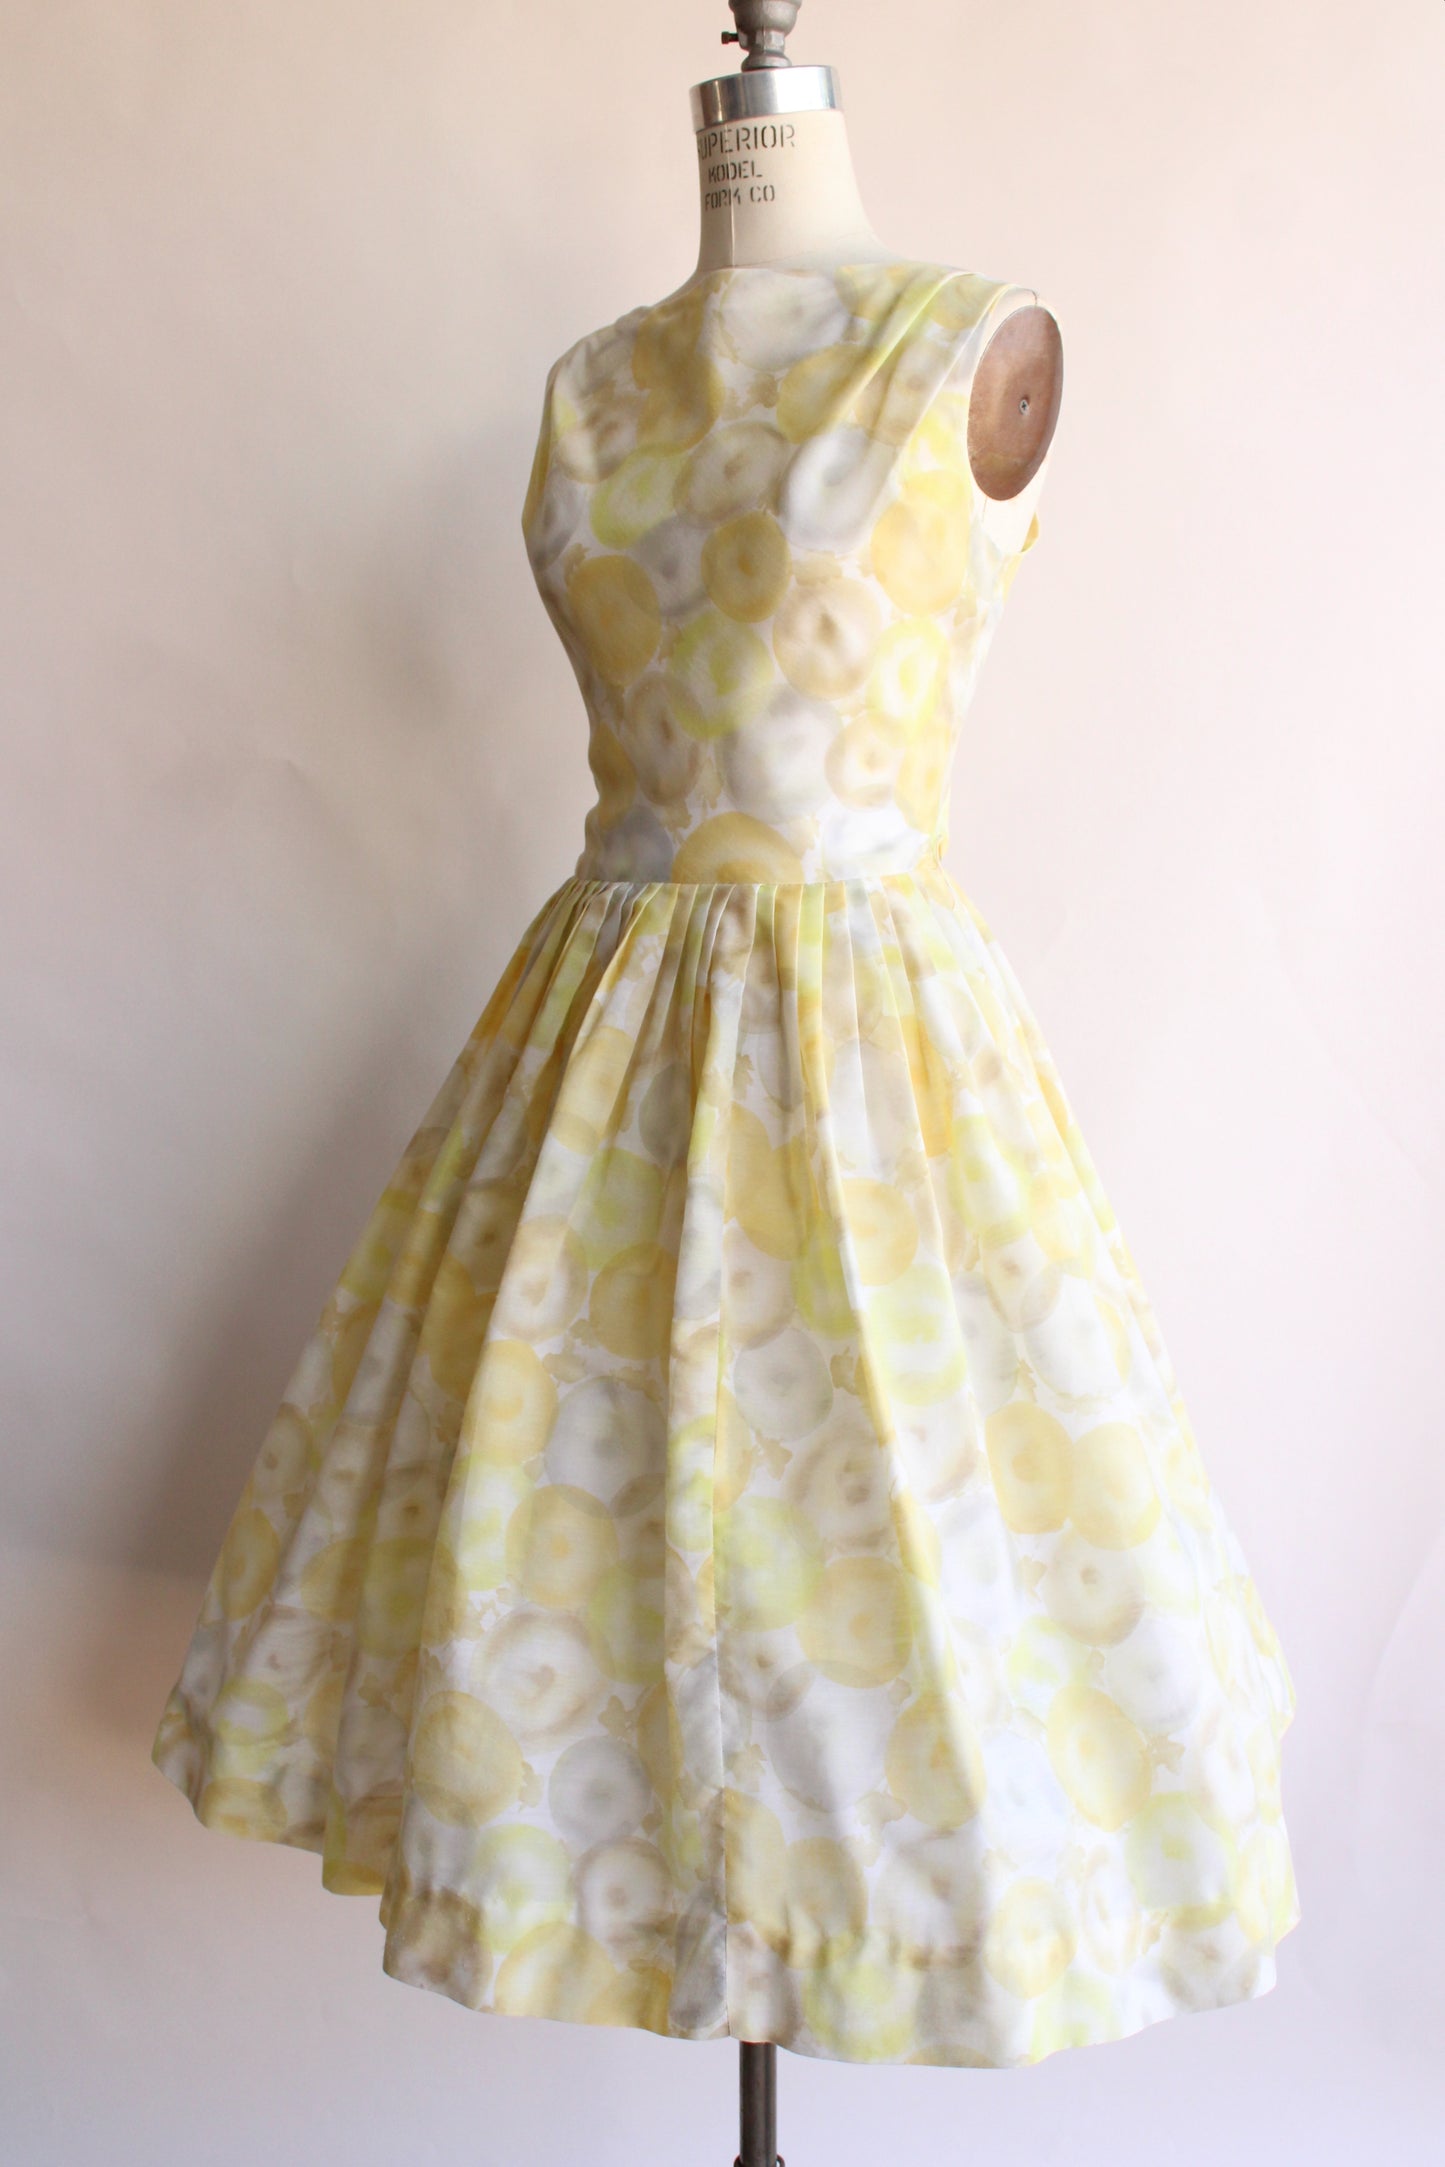 Vintage 1950s Yellow and Gray "Bubble" Dress